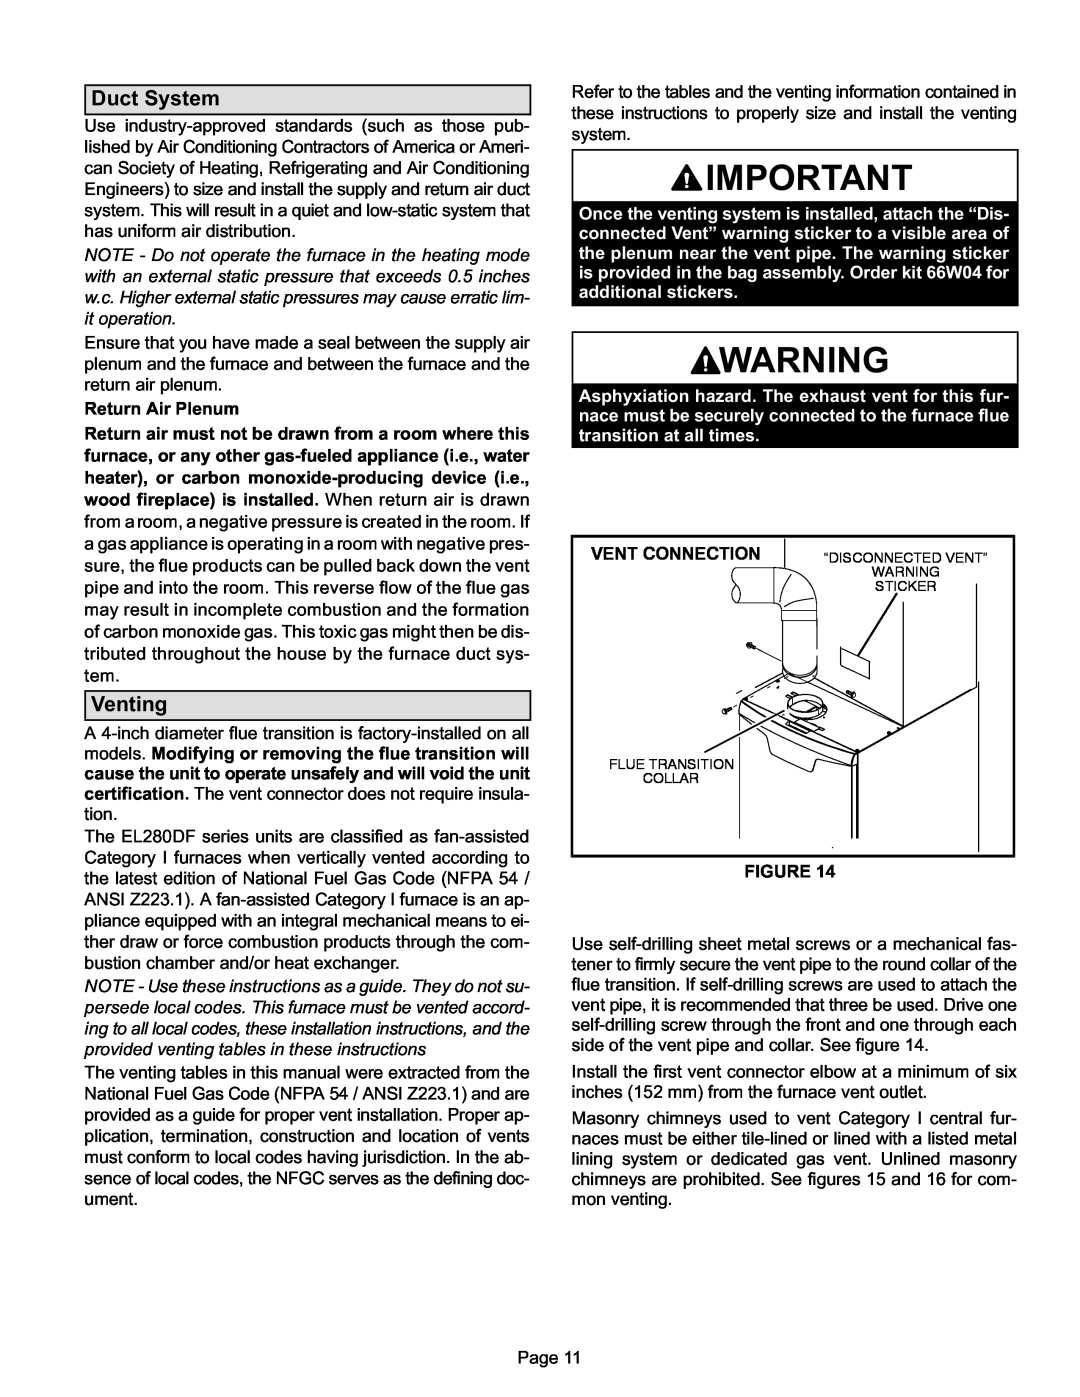 Lennox International Inc EL280DF installation instructions Duct System, Venting, Vent Connection 